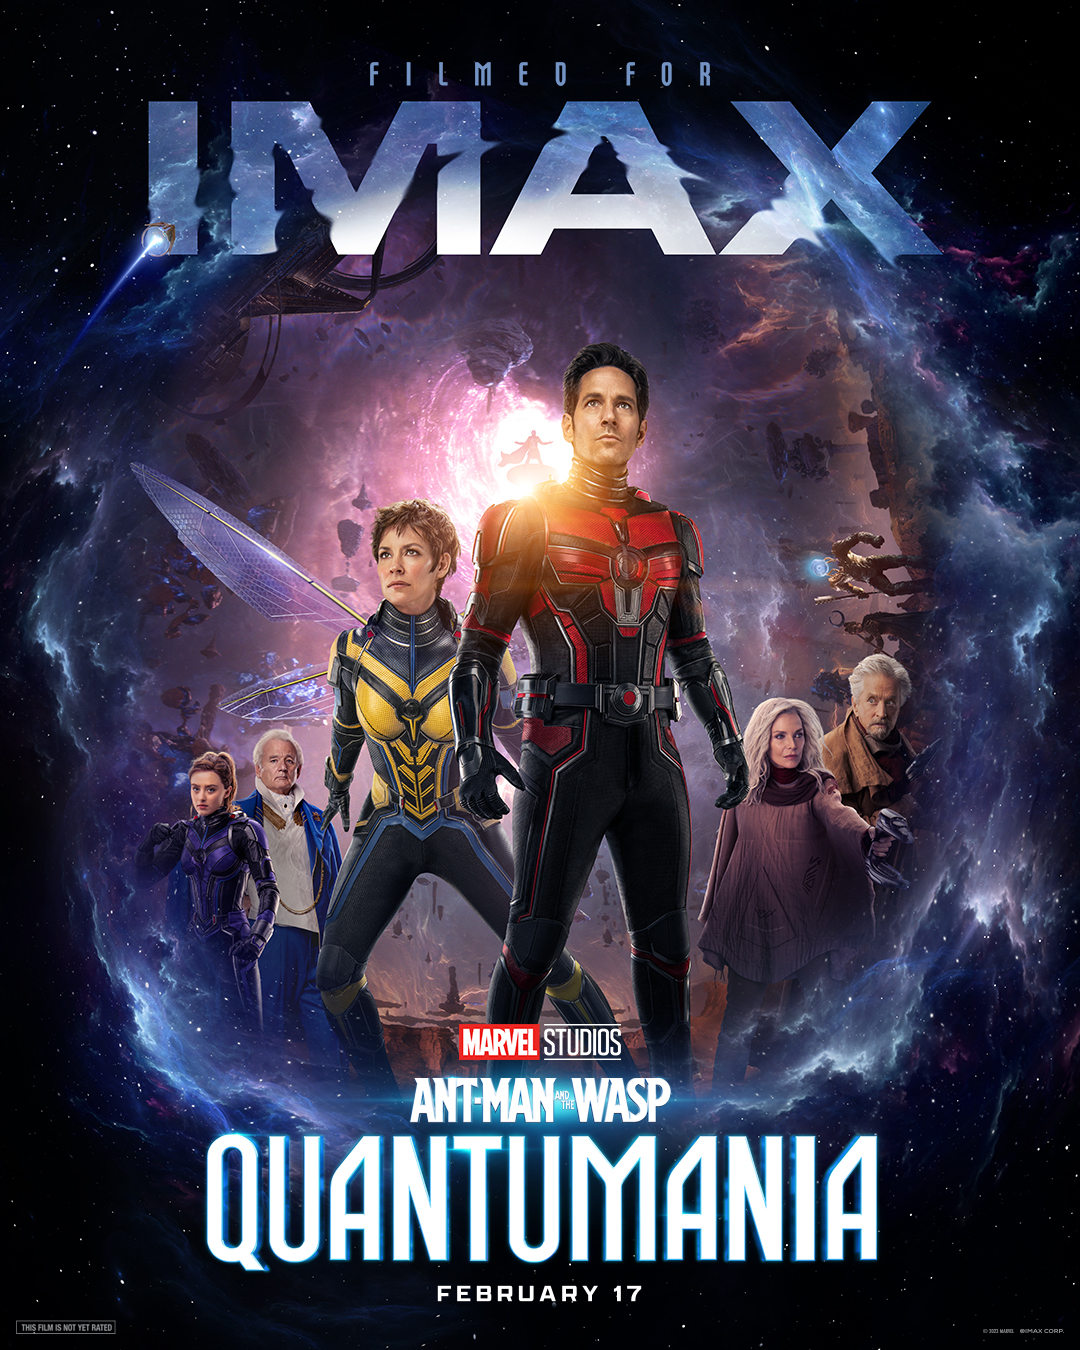 Regal on X: IMAX Poster for 'Ant-Man and the Wasp: Quantumania